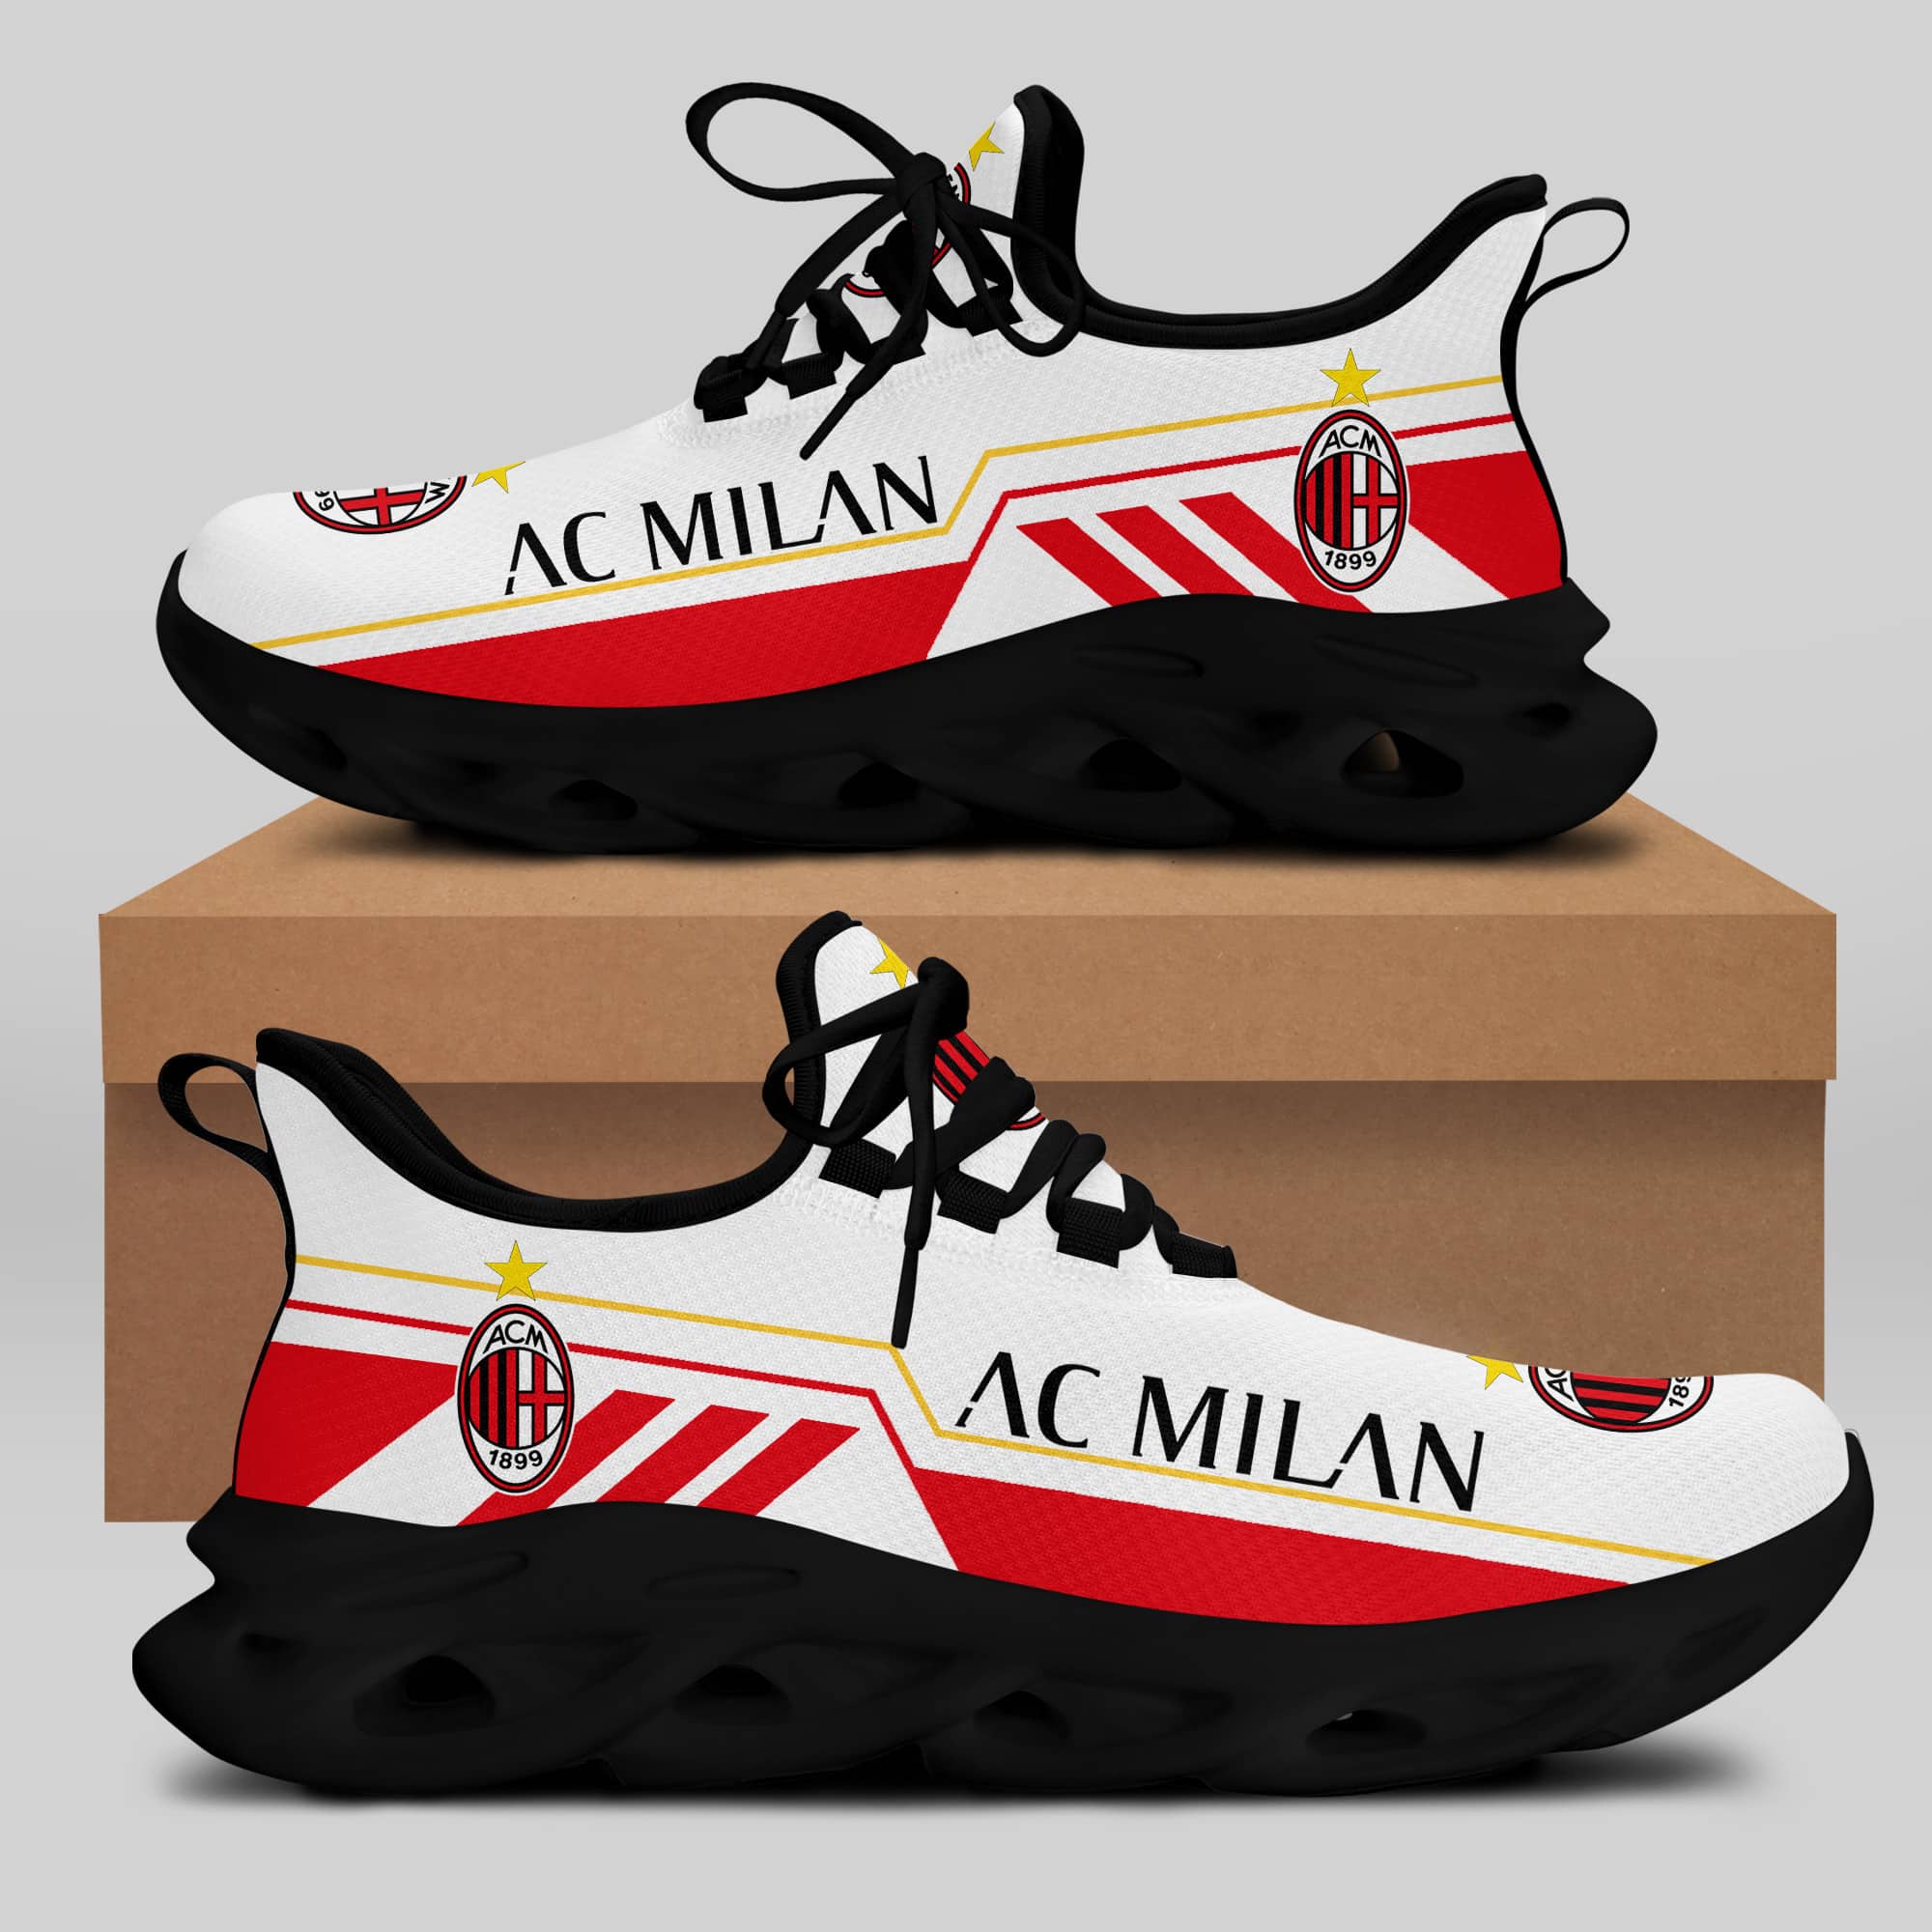 Ac Milan Running Shoes Max Soul Shoes Sneakers Ver 36 2